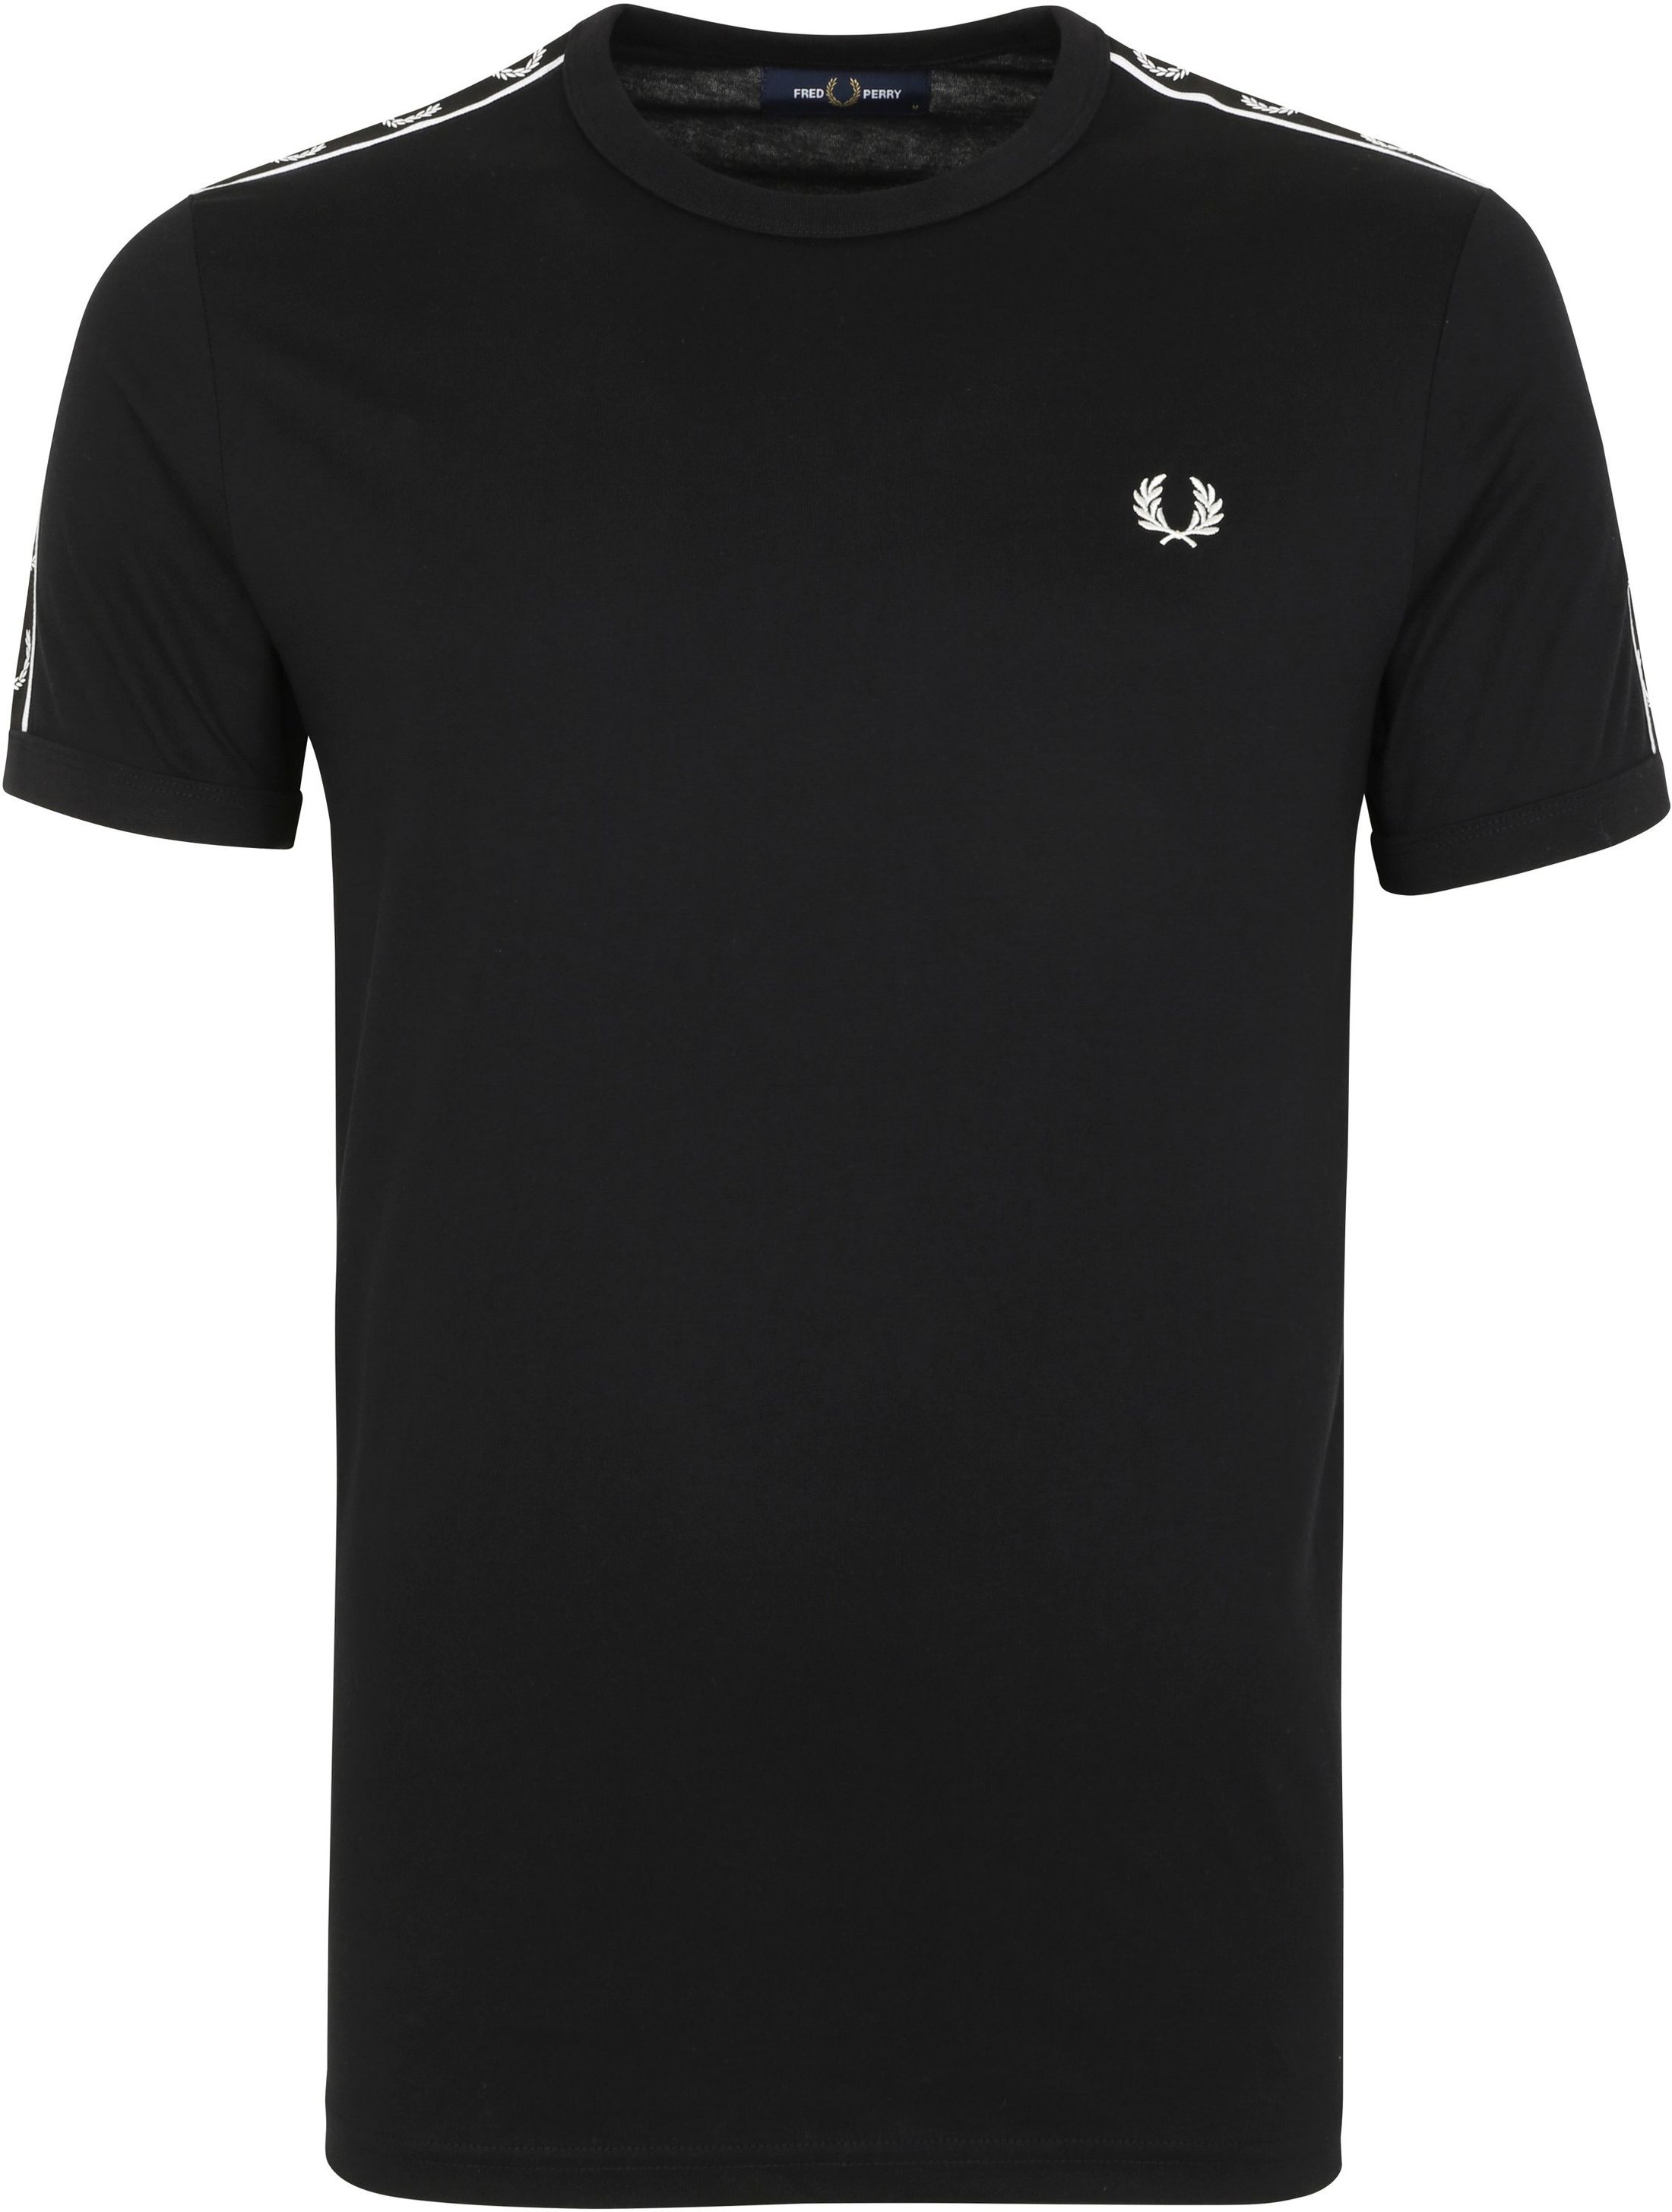 Fred Perry T-Shirt Ringer  Black size L